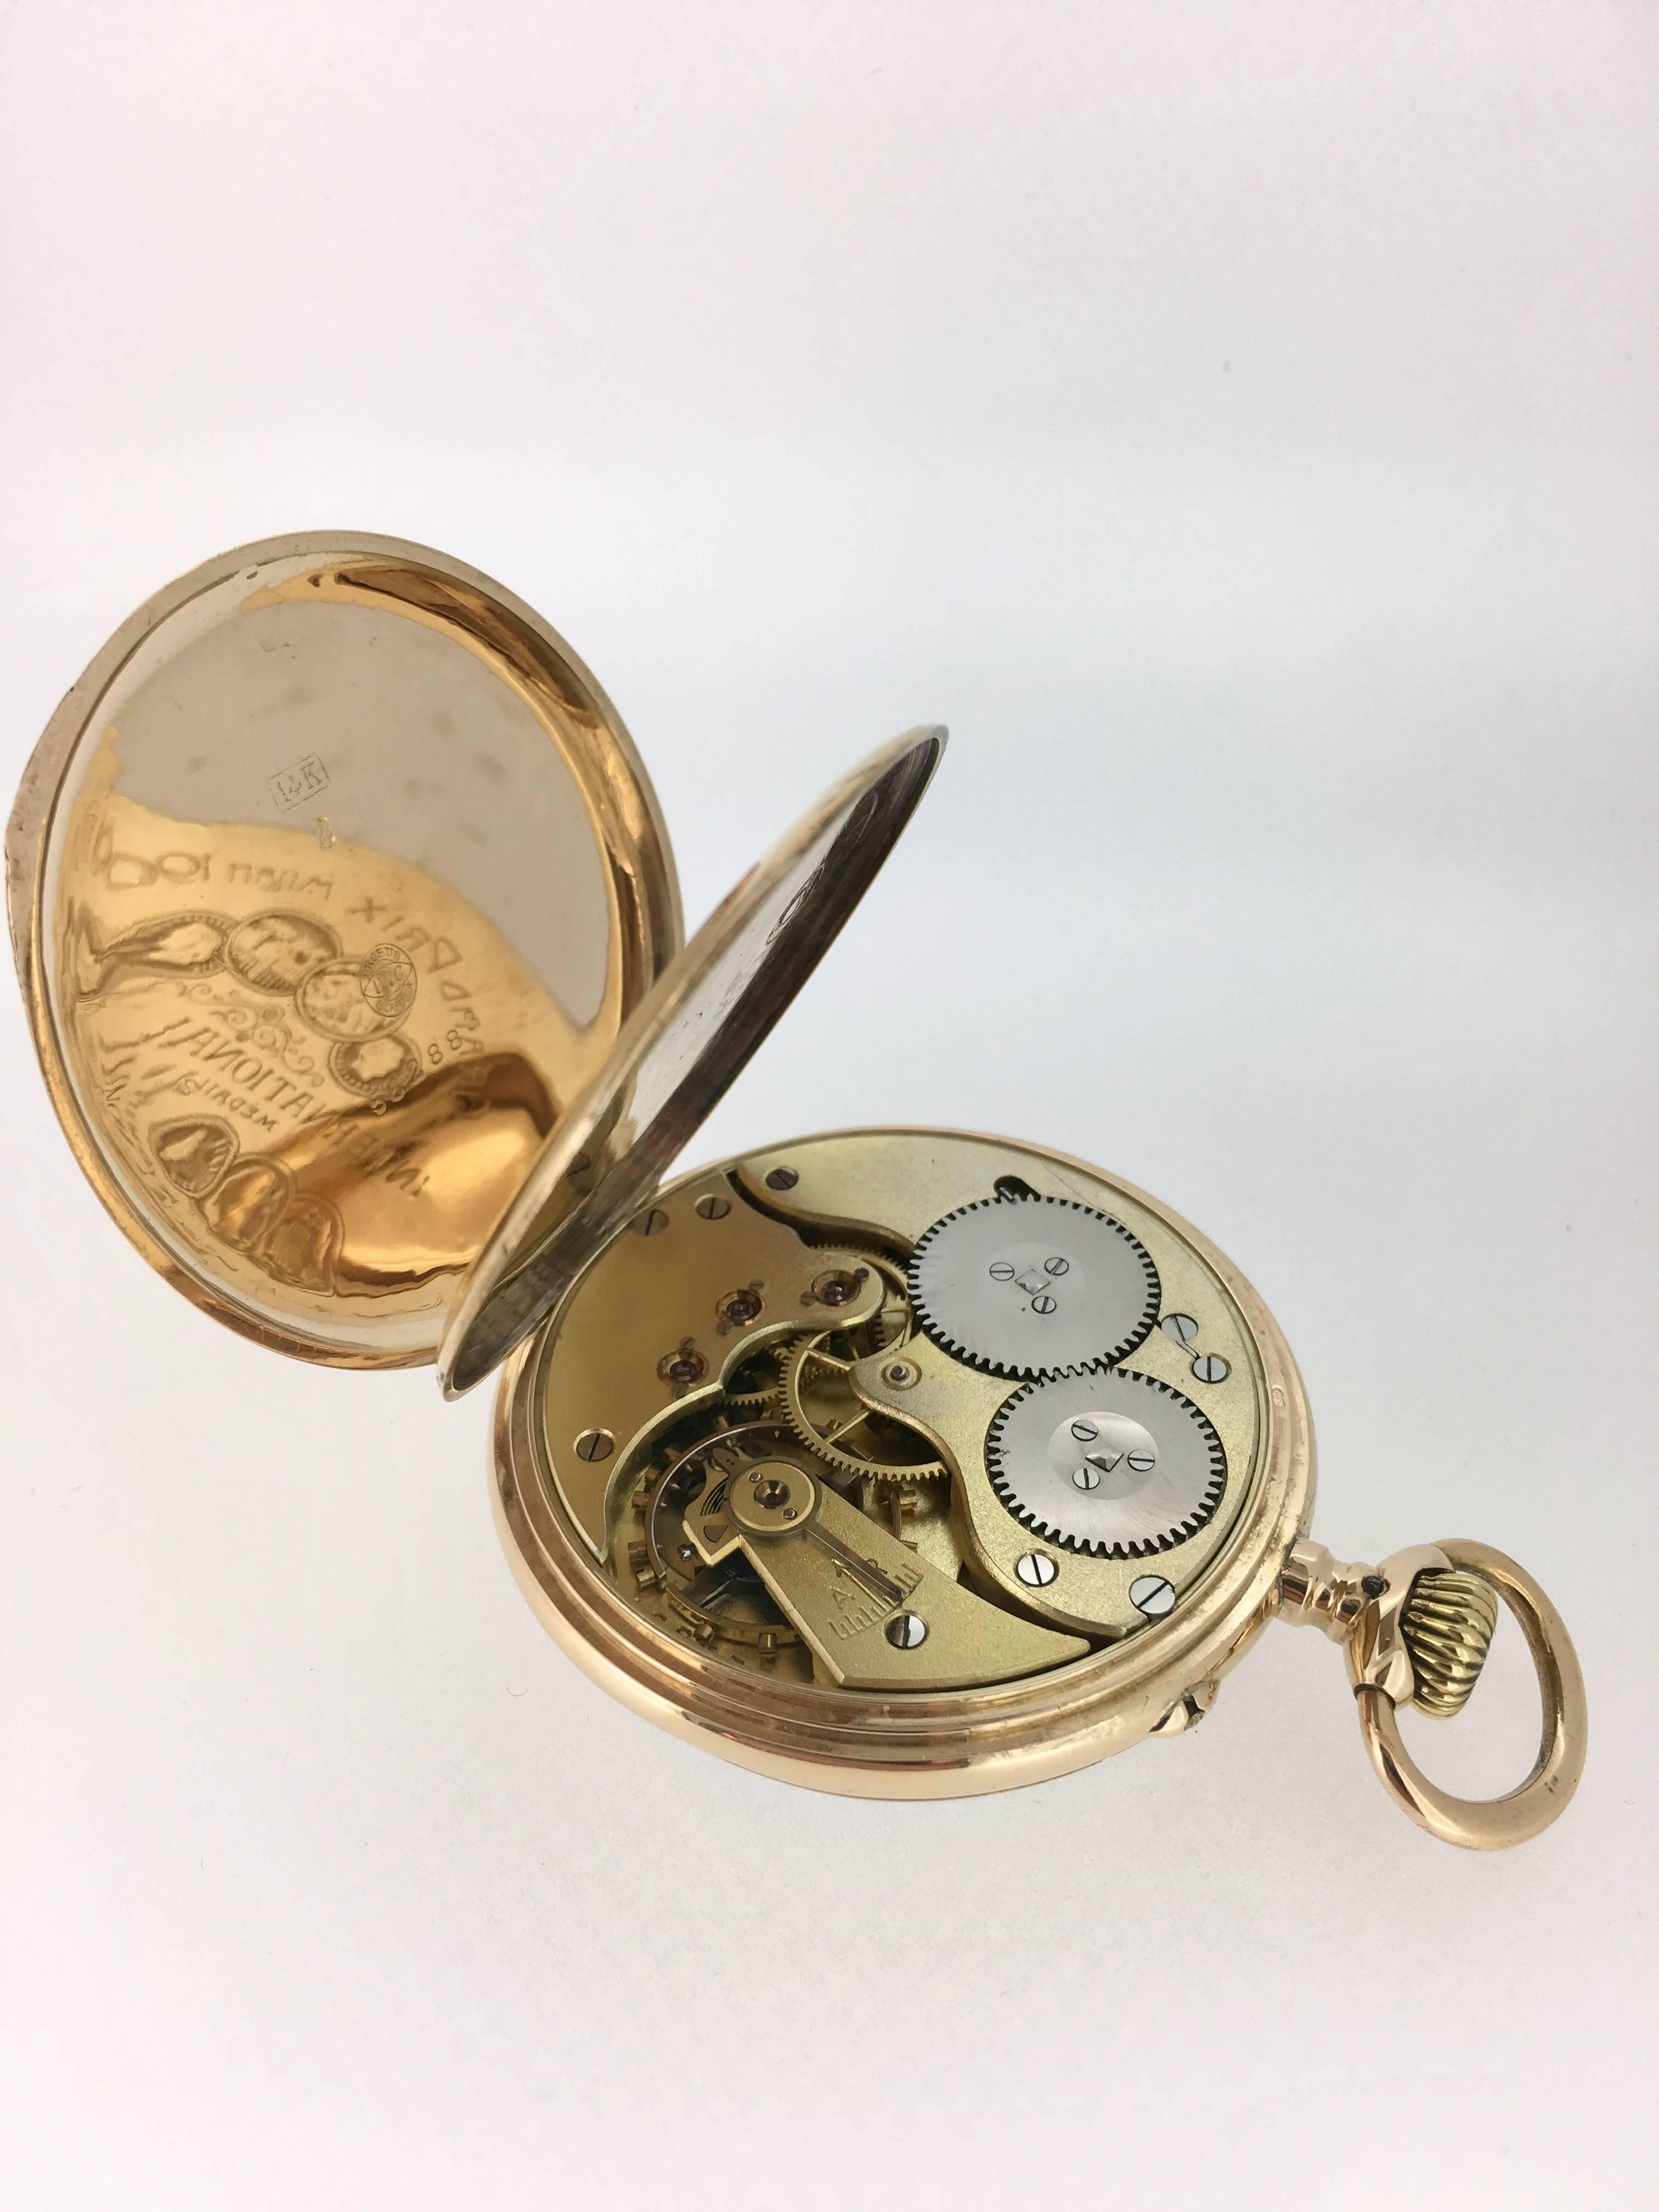 IWC pink gold Pocket Watch with Gold Chain, circa 1910 For Sale 7